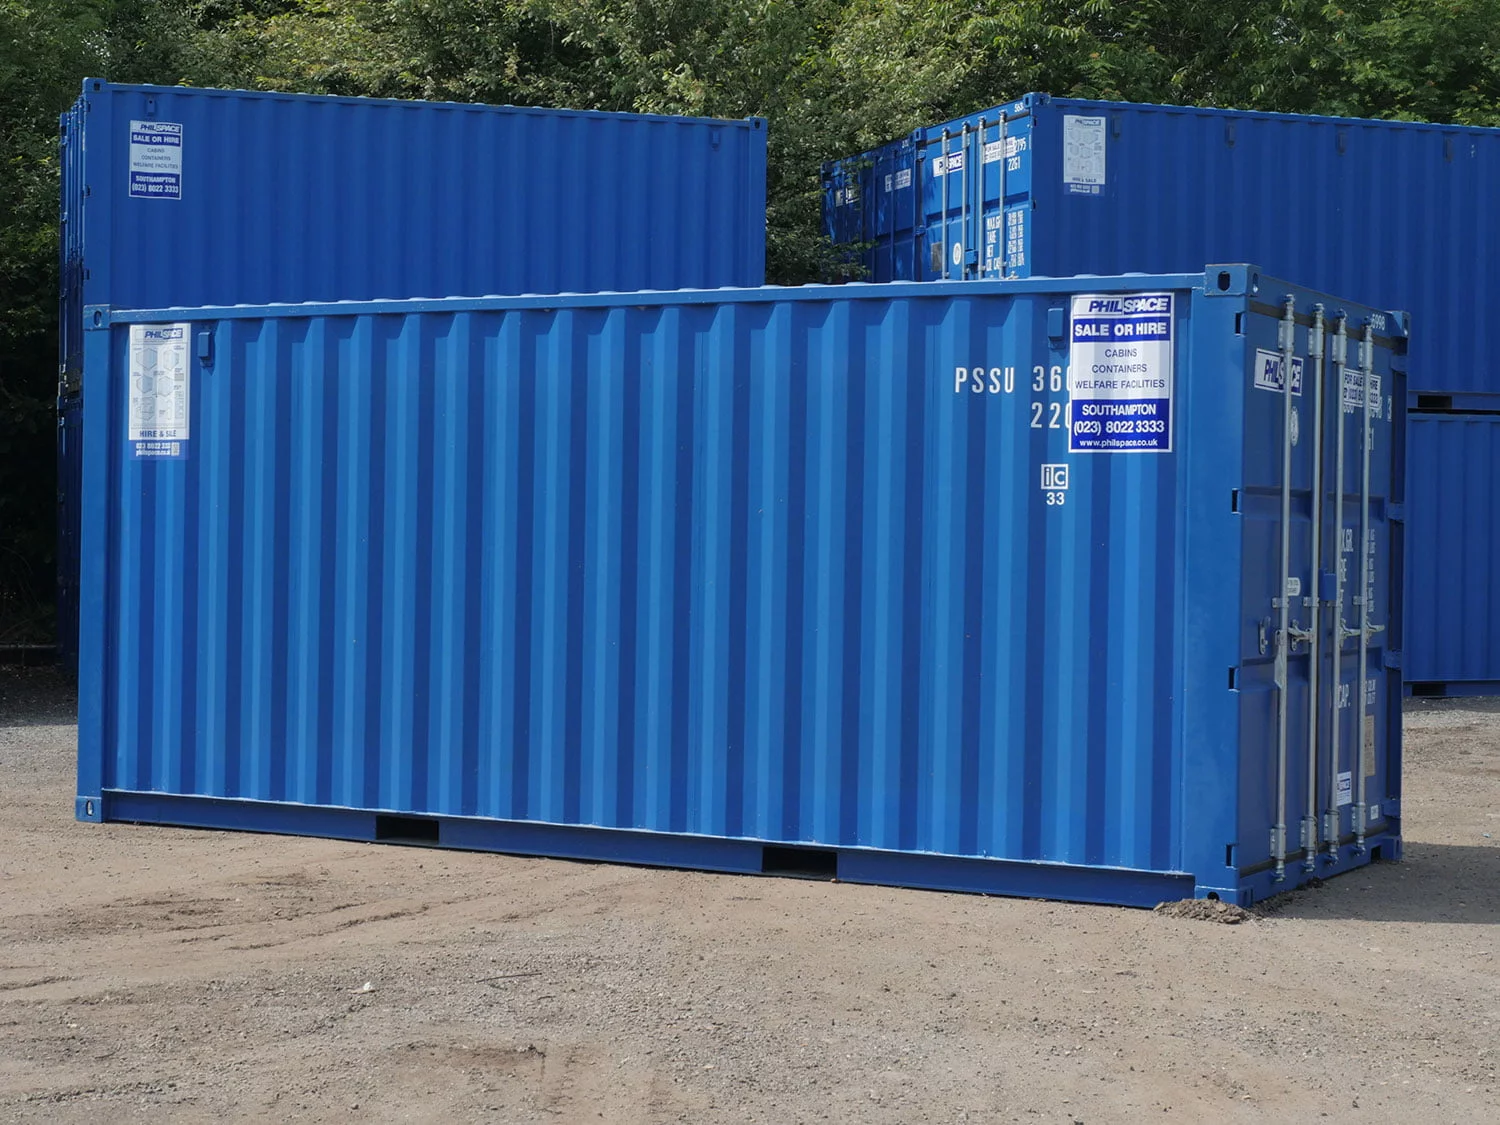 Types of shipping containers - Standard shipping container